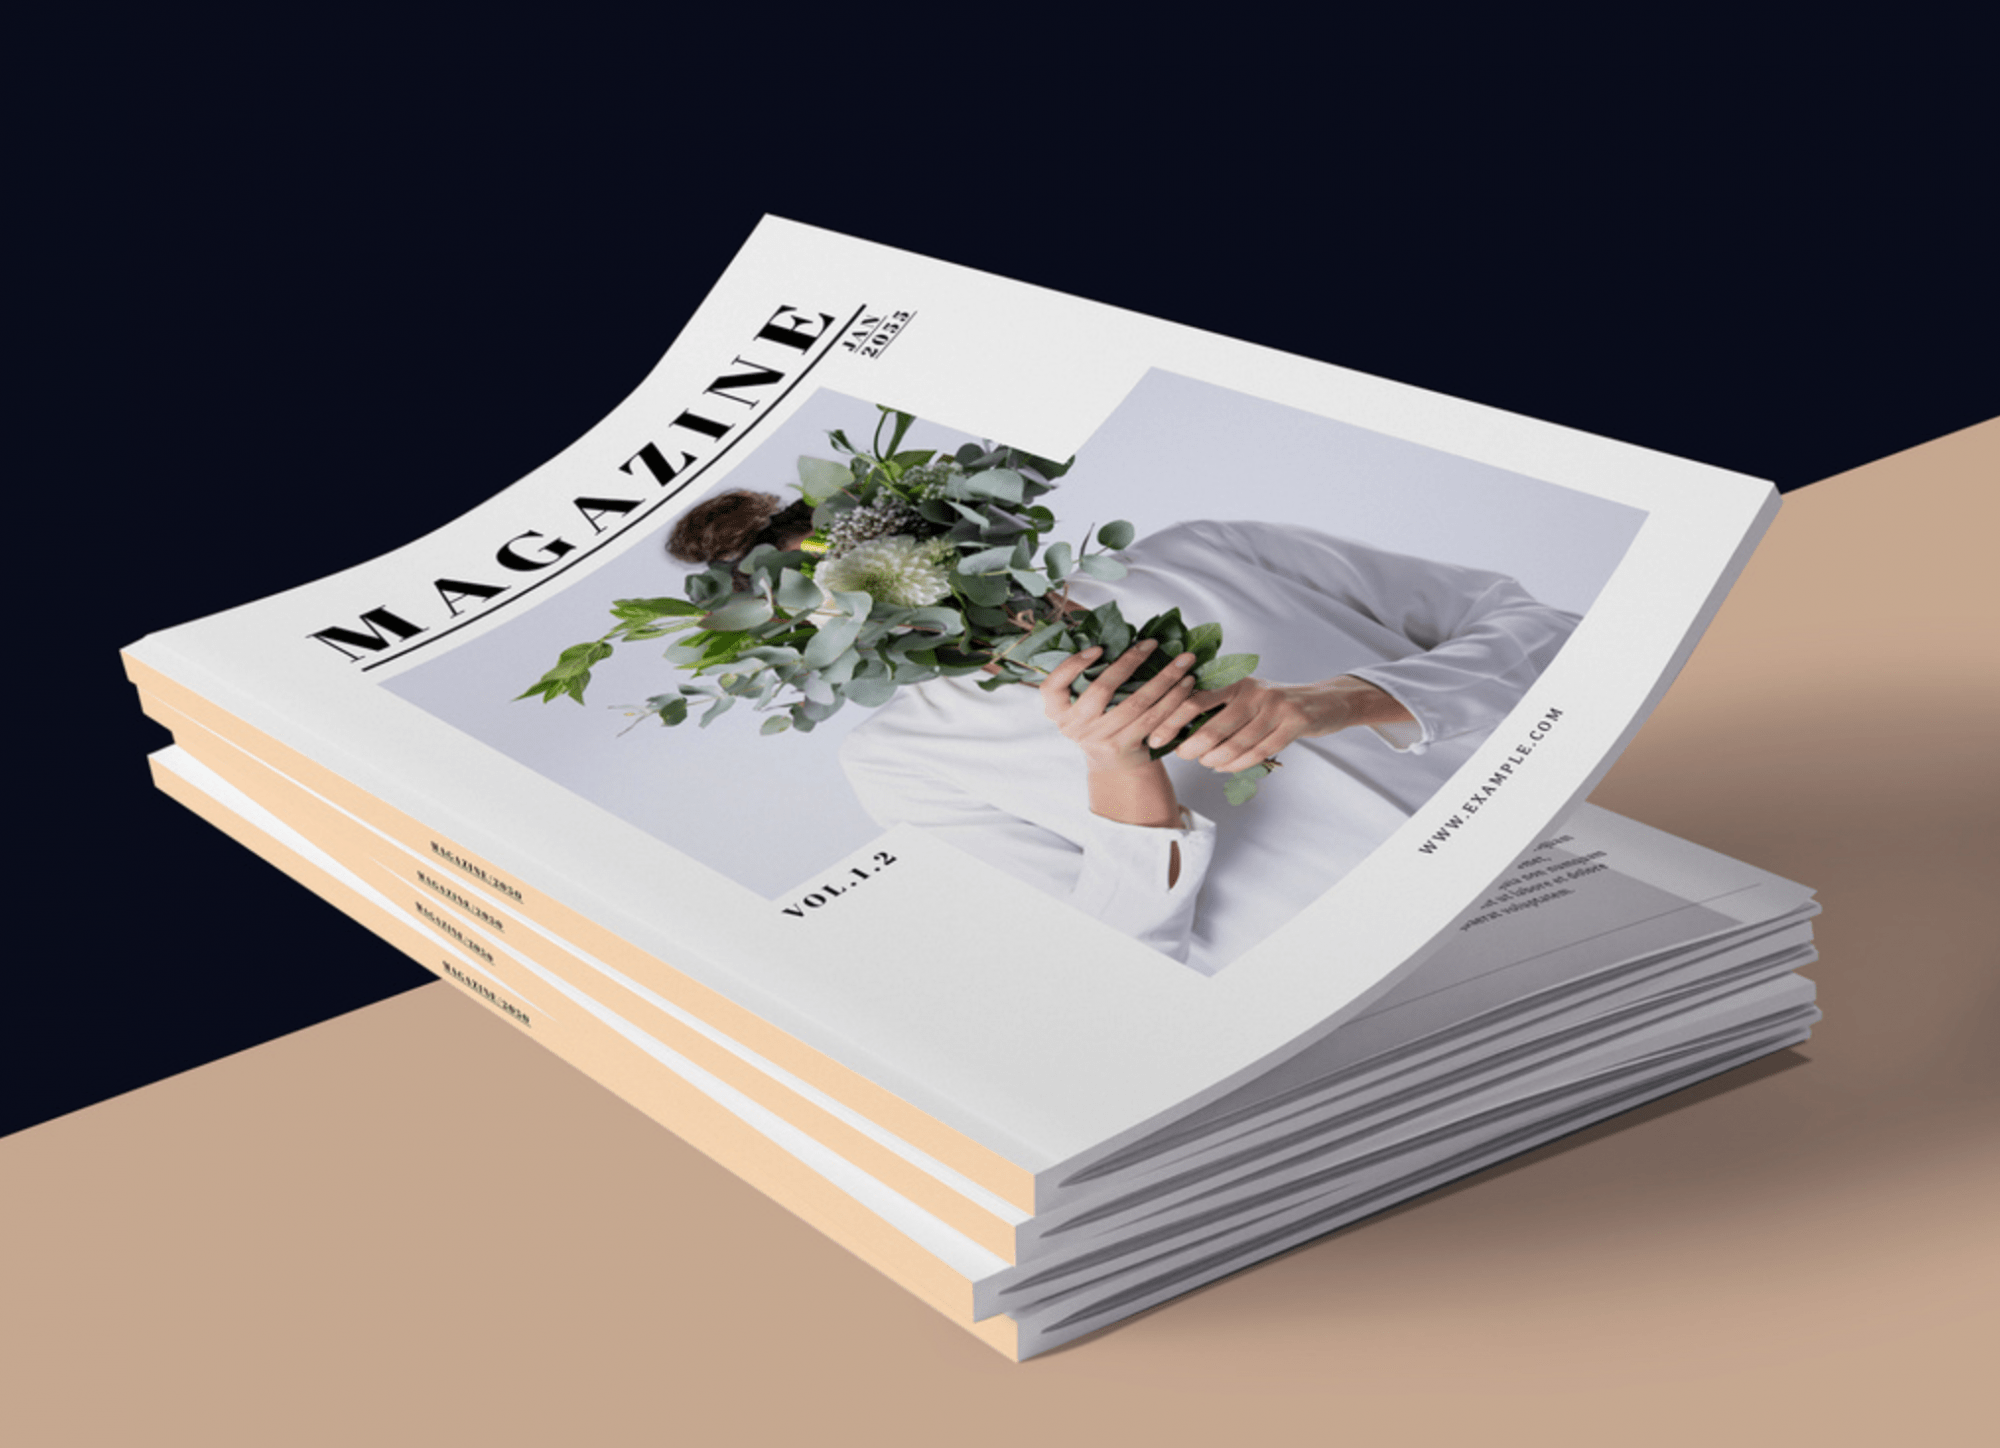 Free Floral Magazine Mockup with a flower bouquet, showcasing a magazine design